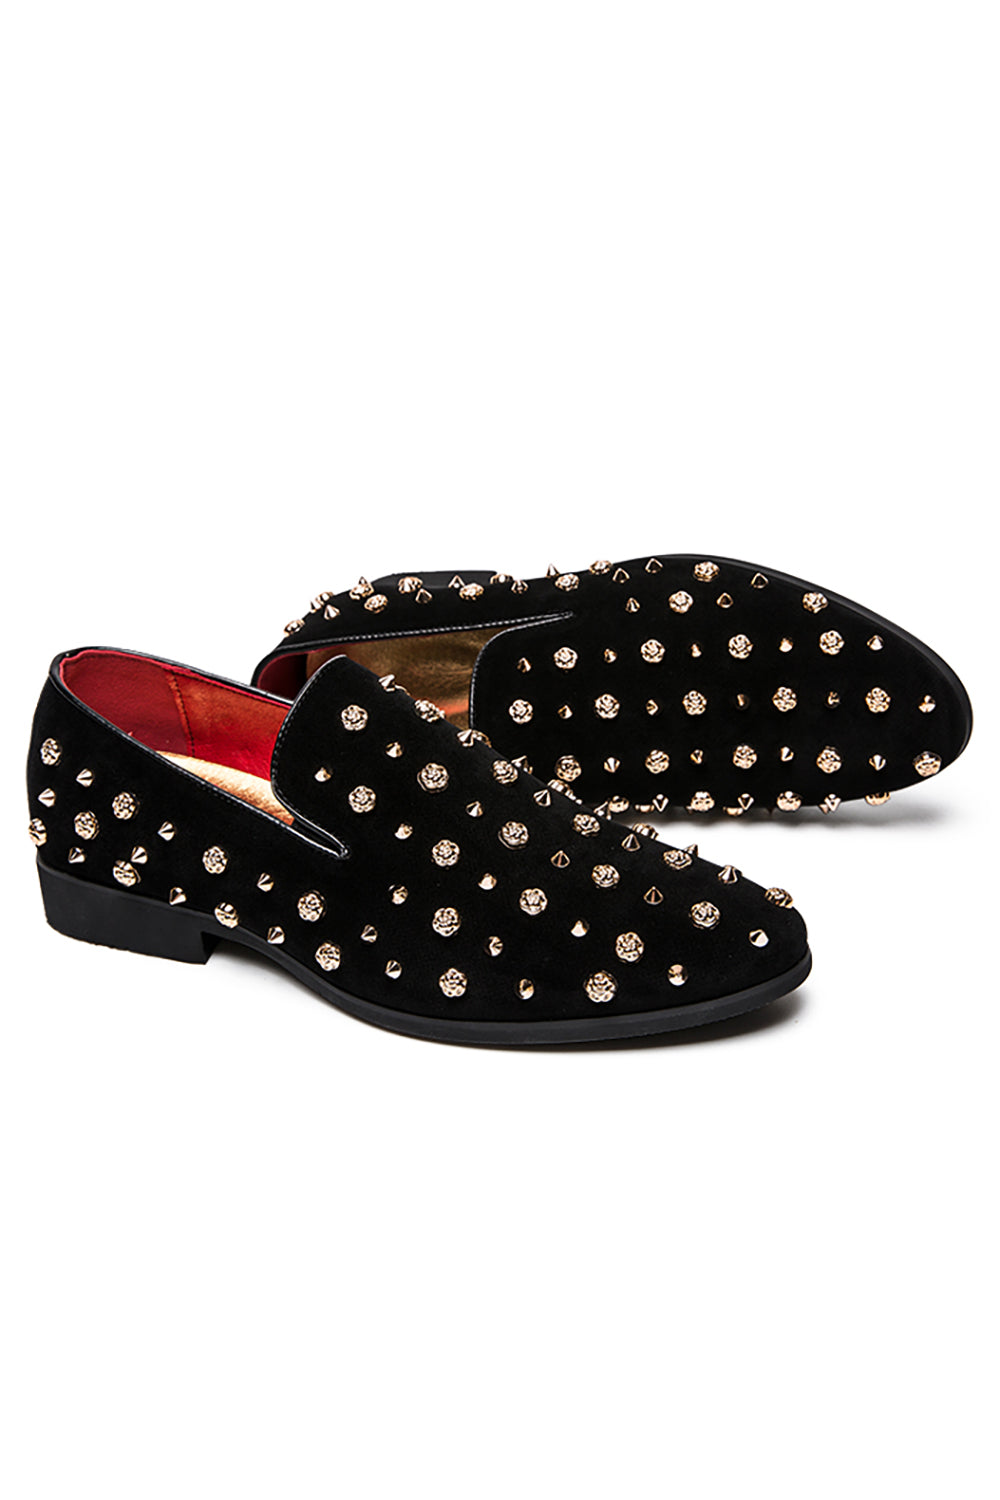 Men's Leather Casual Shoes With Studs